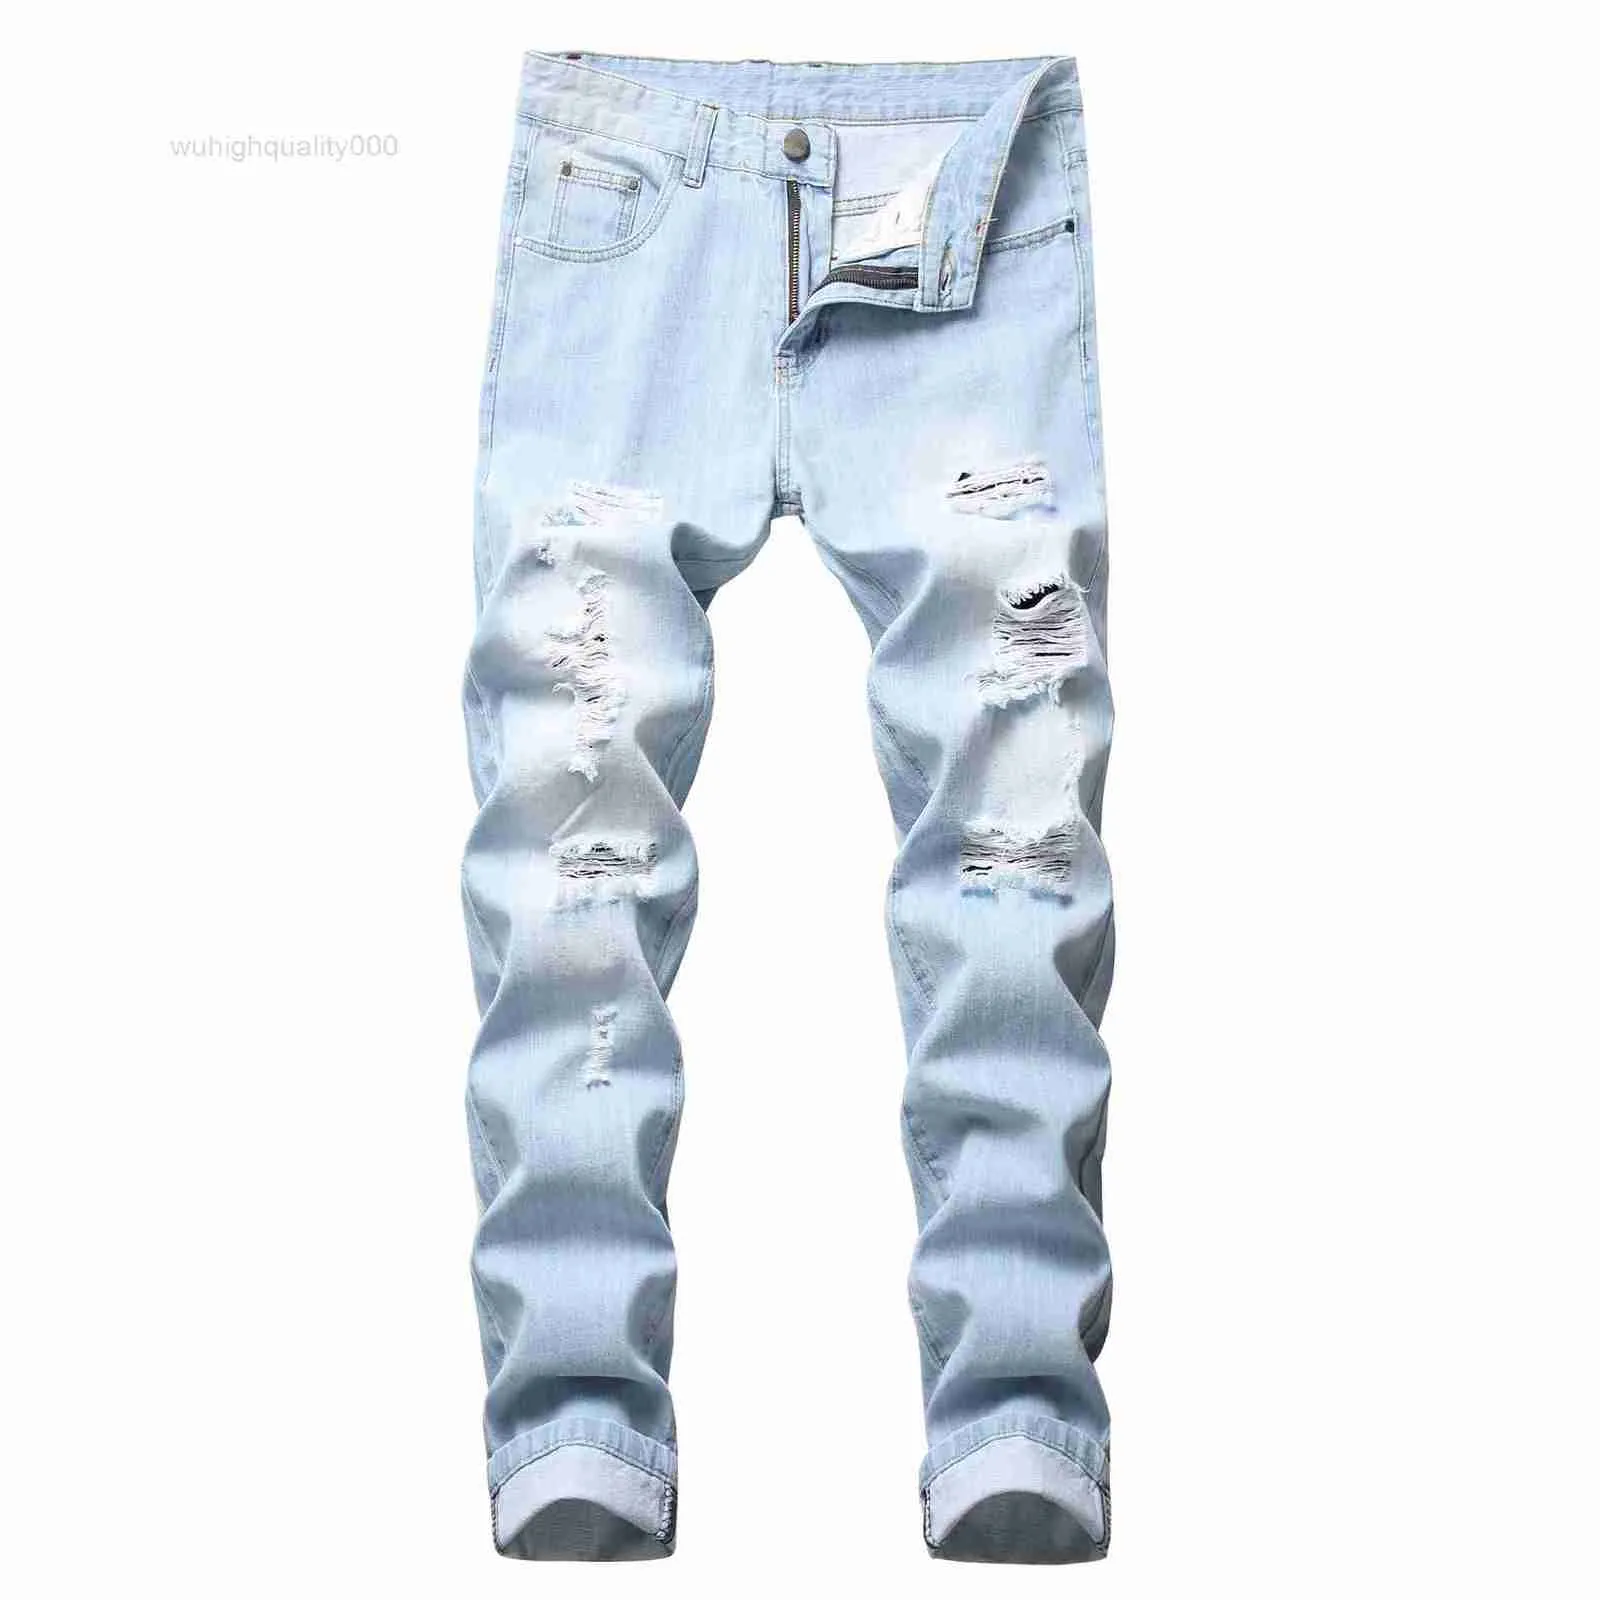 Mens Jeans Light Color Slim Fit Hole High Street Blue Nonelastic Casual Fashion Urban Stretwear